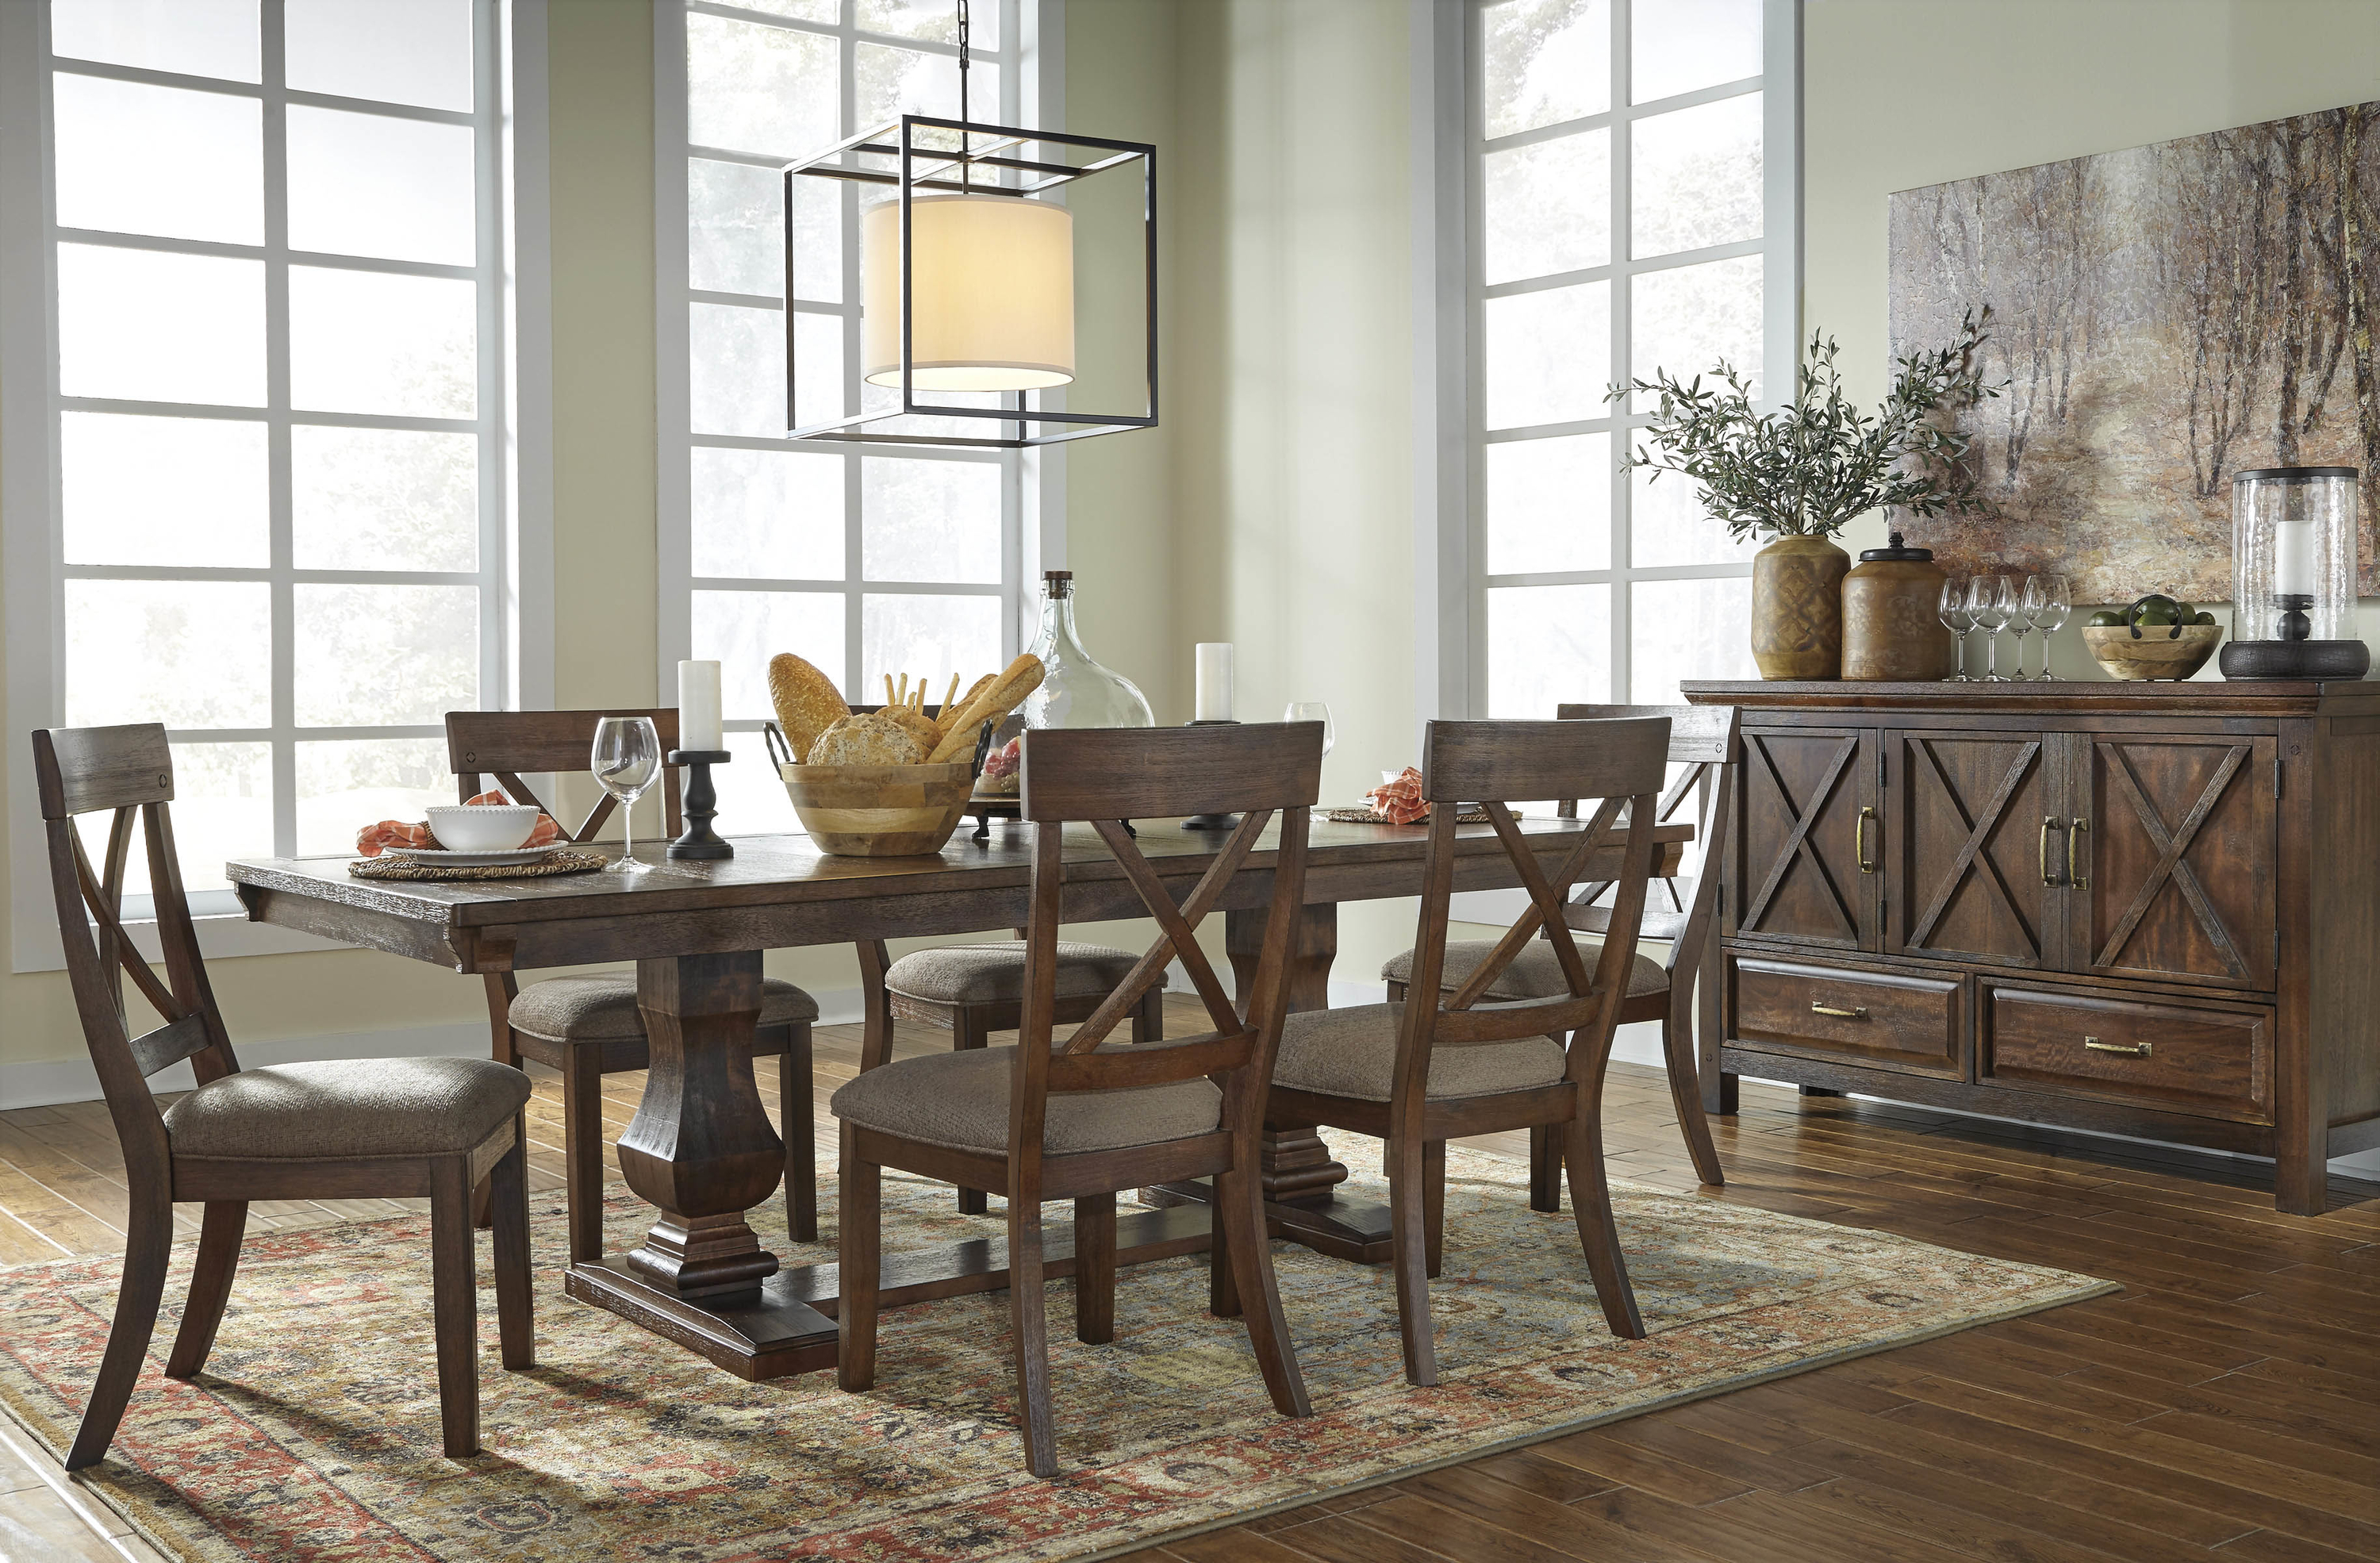 New dining room furniture by Ashley Furniture is here ...